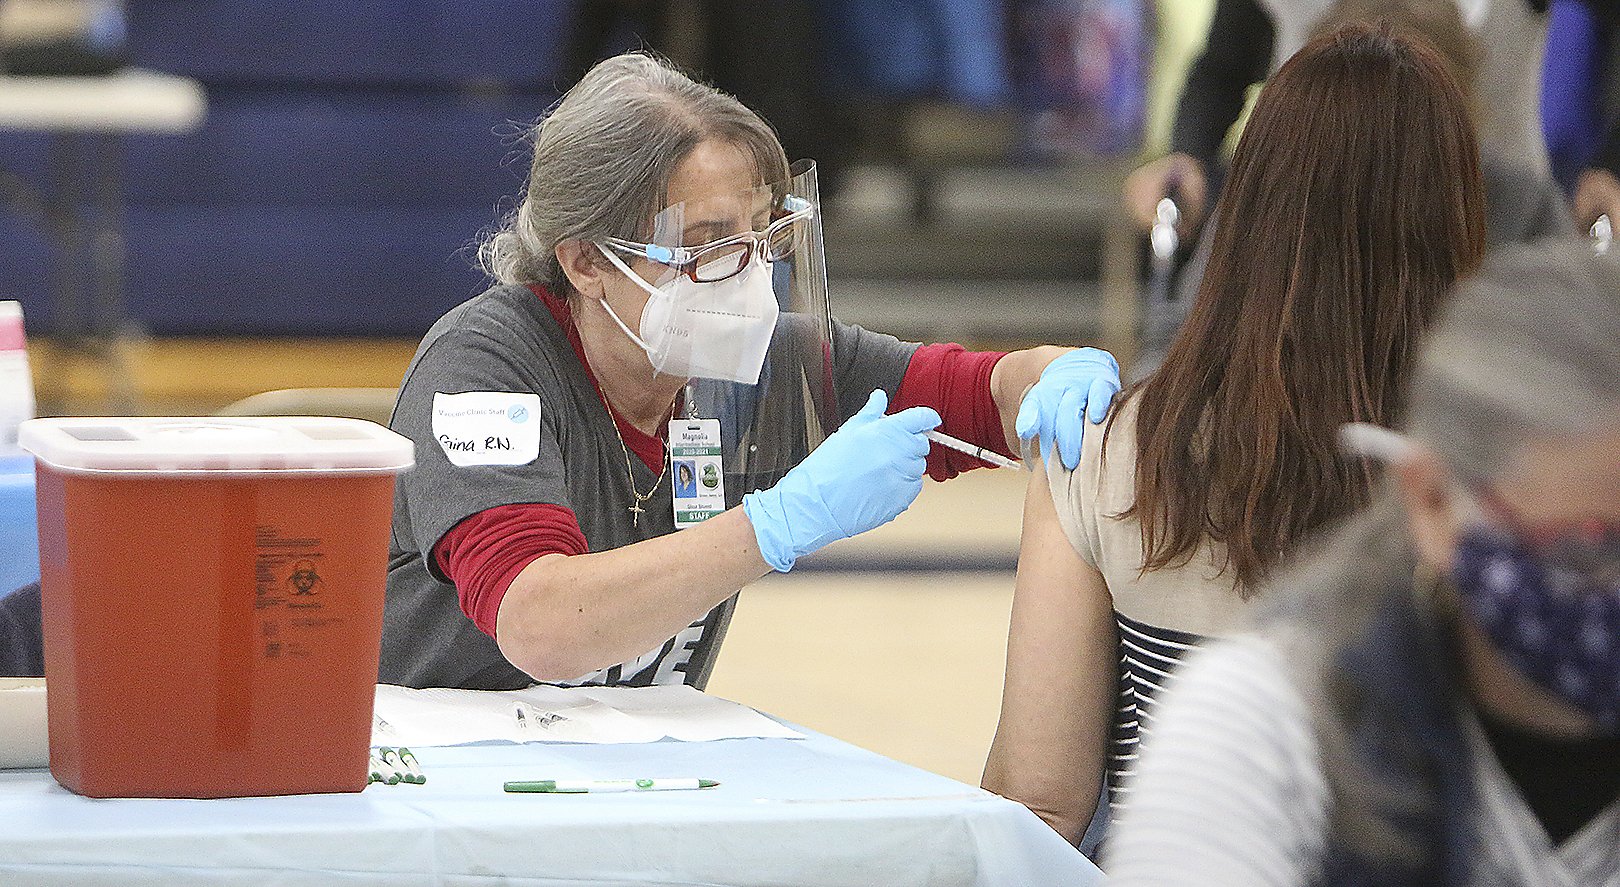 Signs of hope emerge, with vaccines increasing and infections decreasing in California